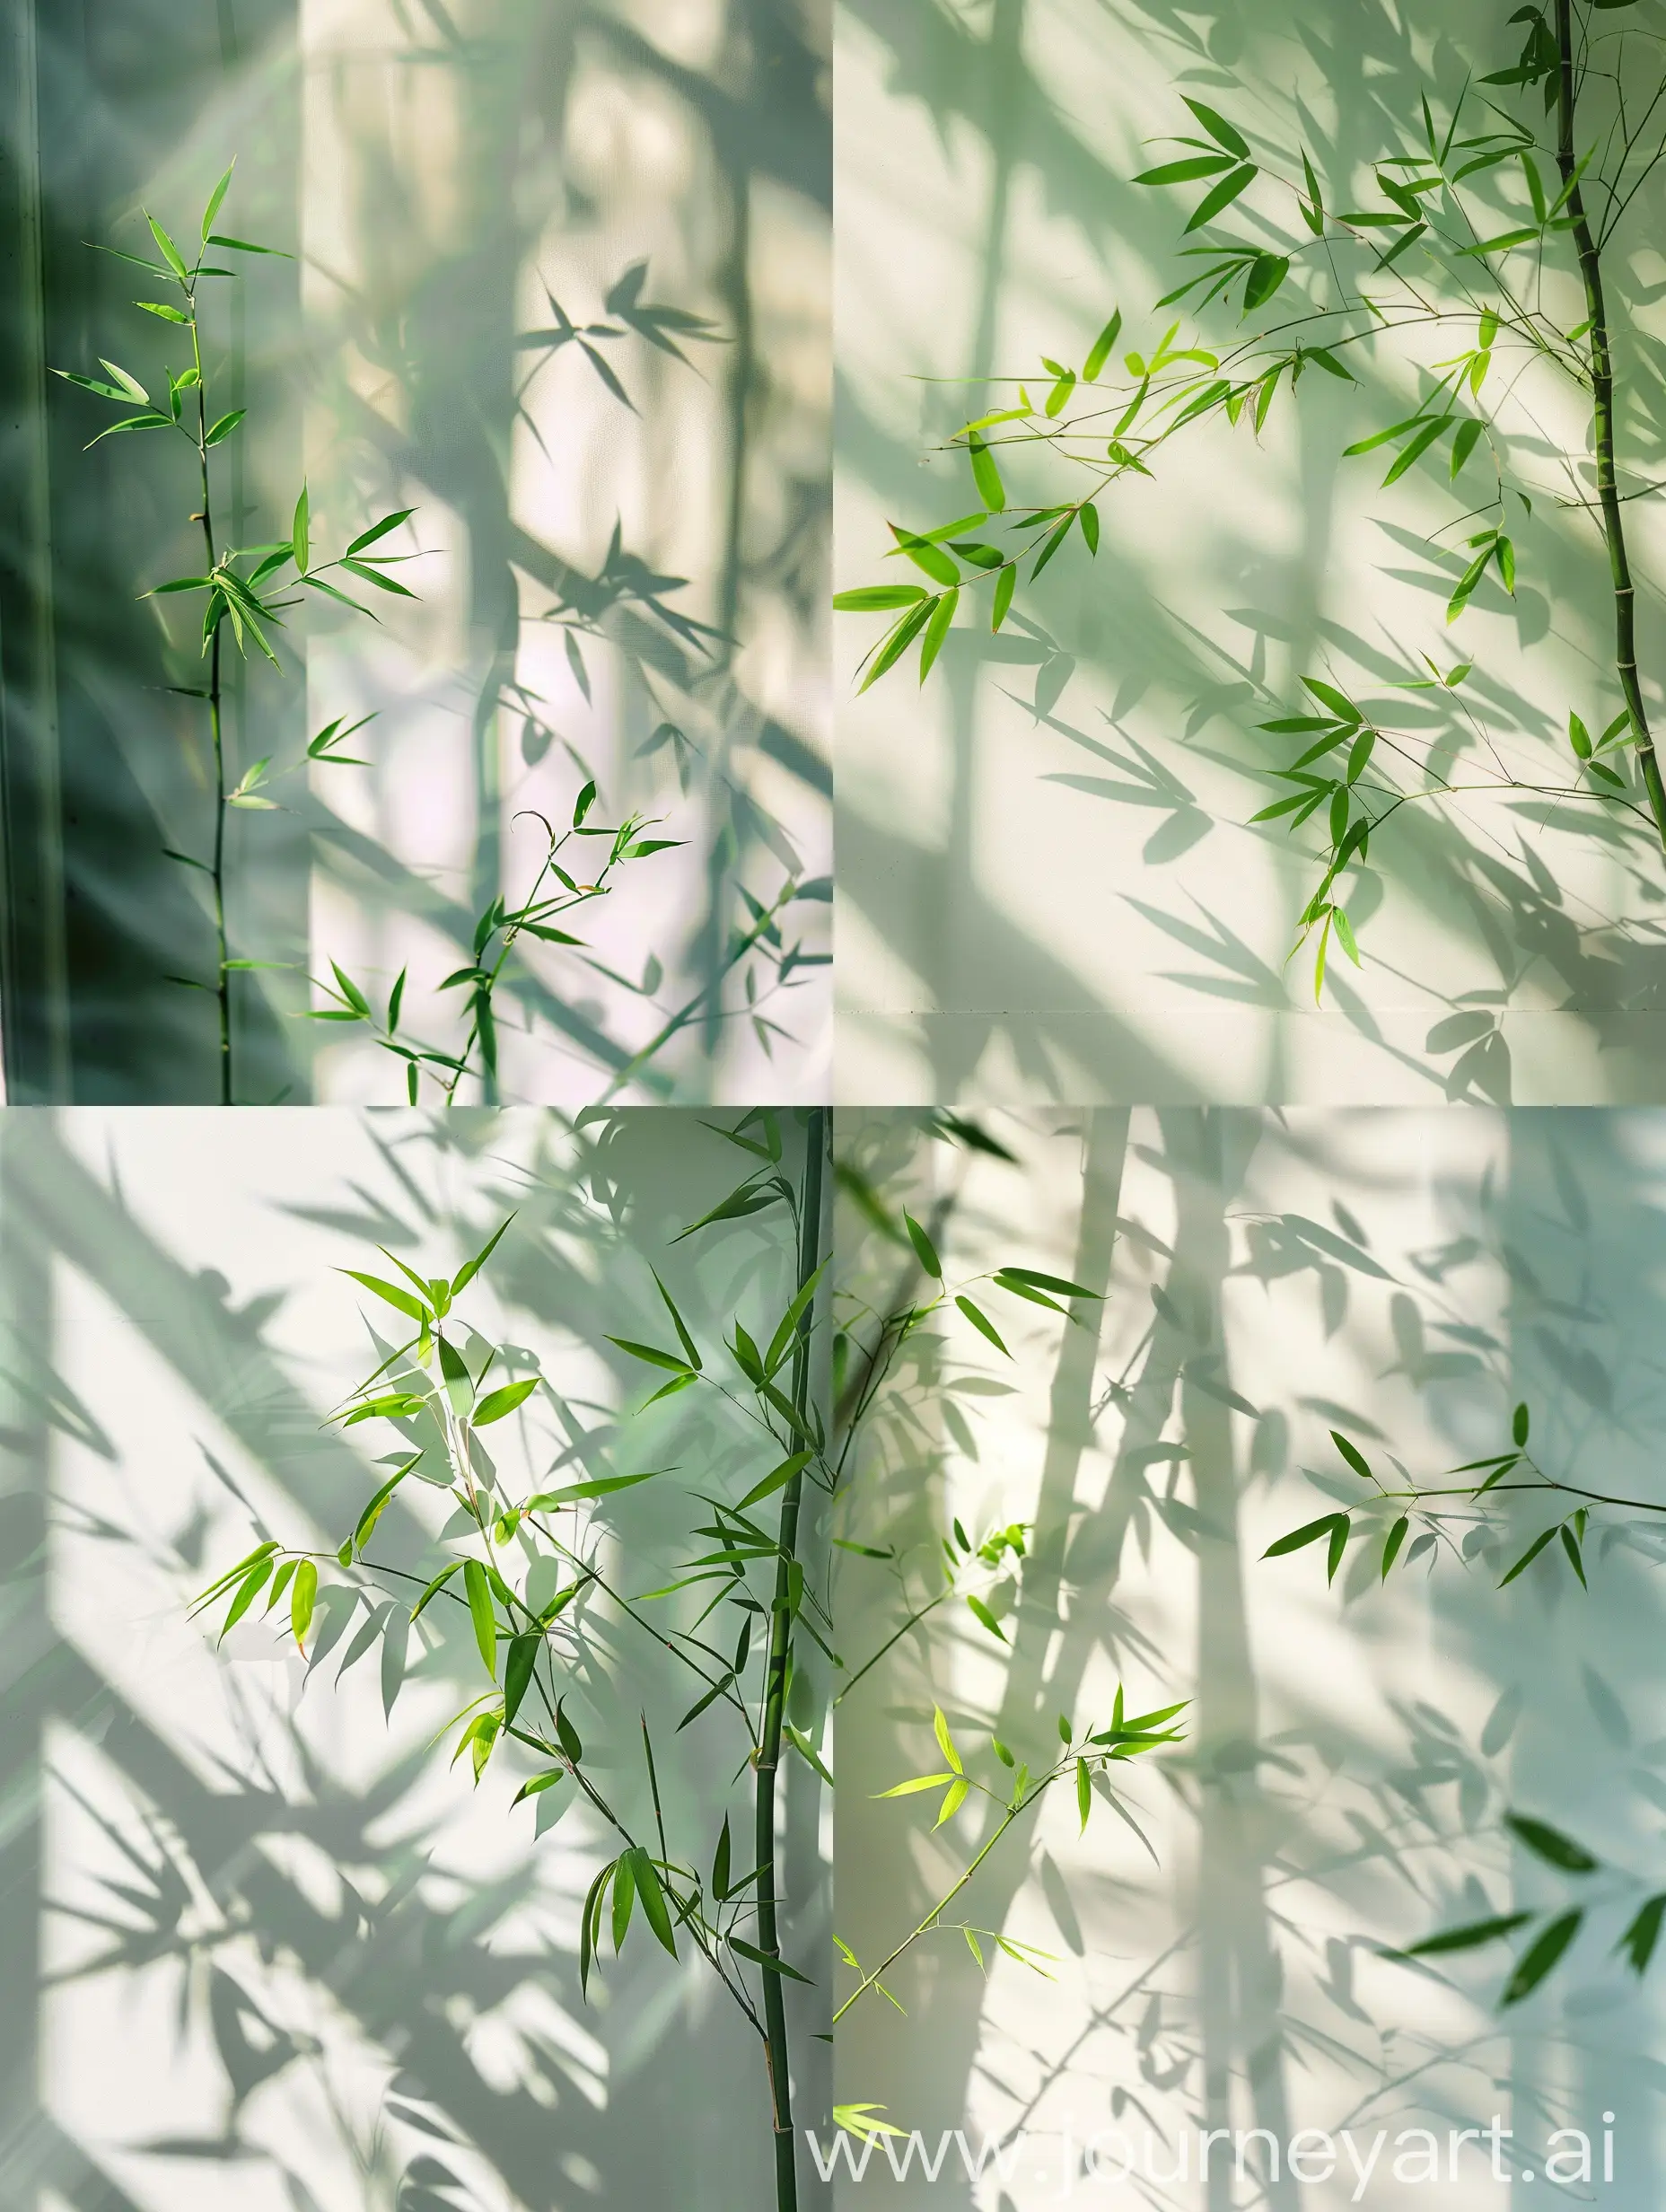 Romantic-Outdoor-Scene-with-Sunlit-Bamboo-and-Shadows-on-White-Walls